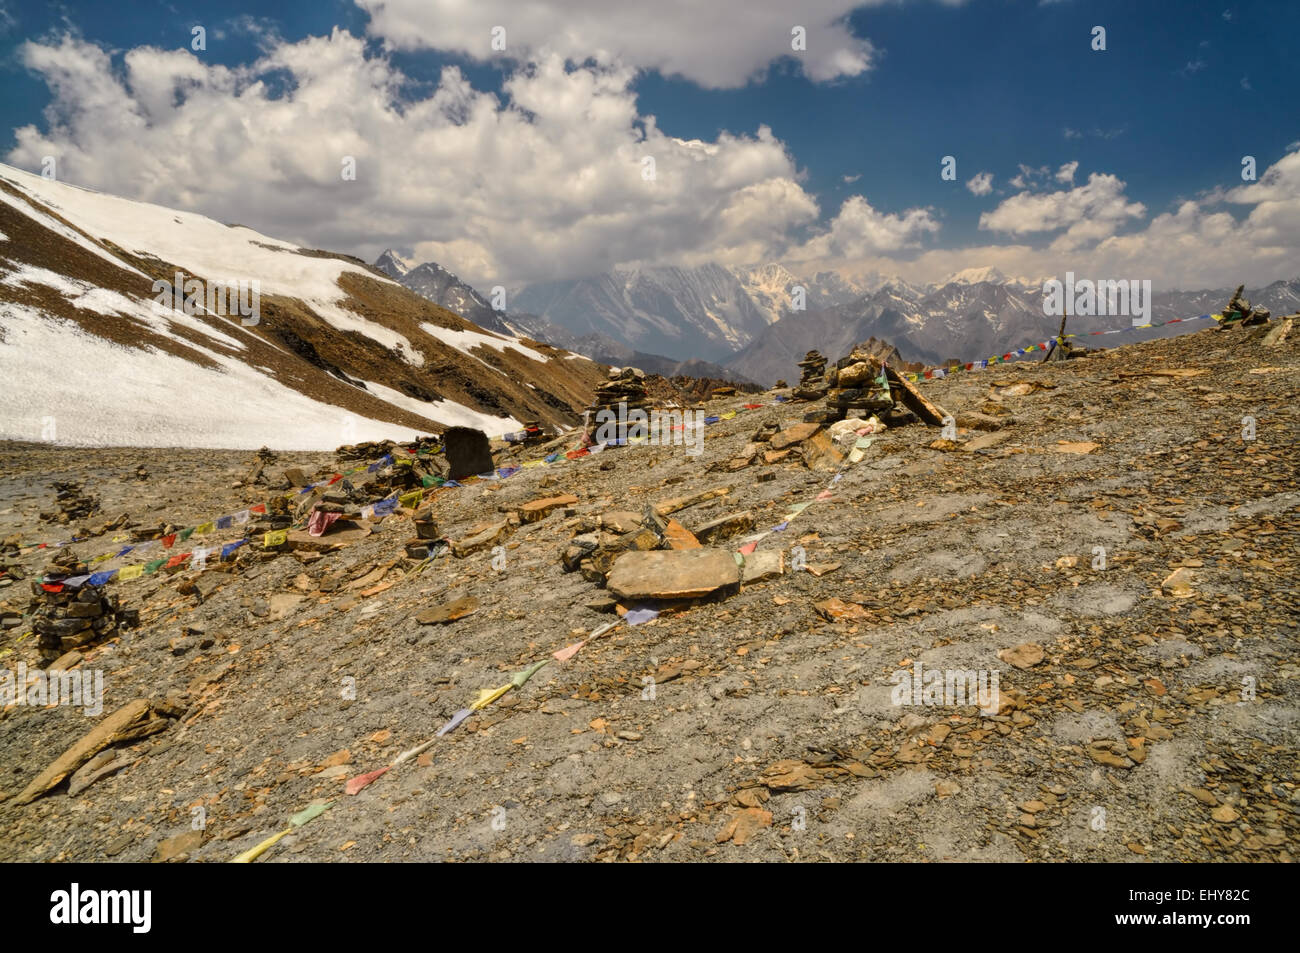 Picturesque scenery in Himalayas mountains in Nepal Stock Photo